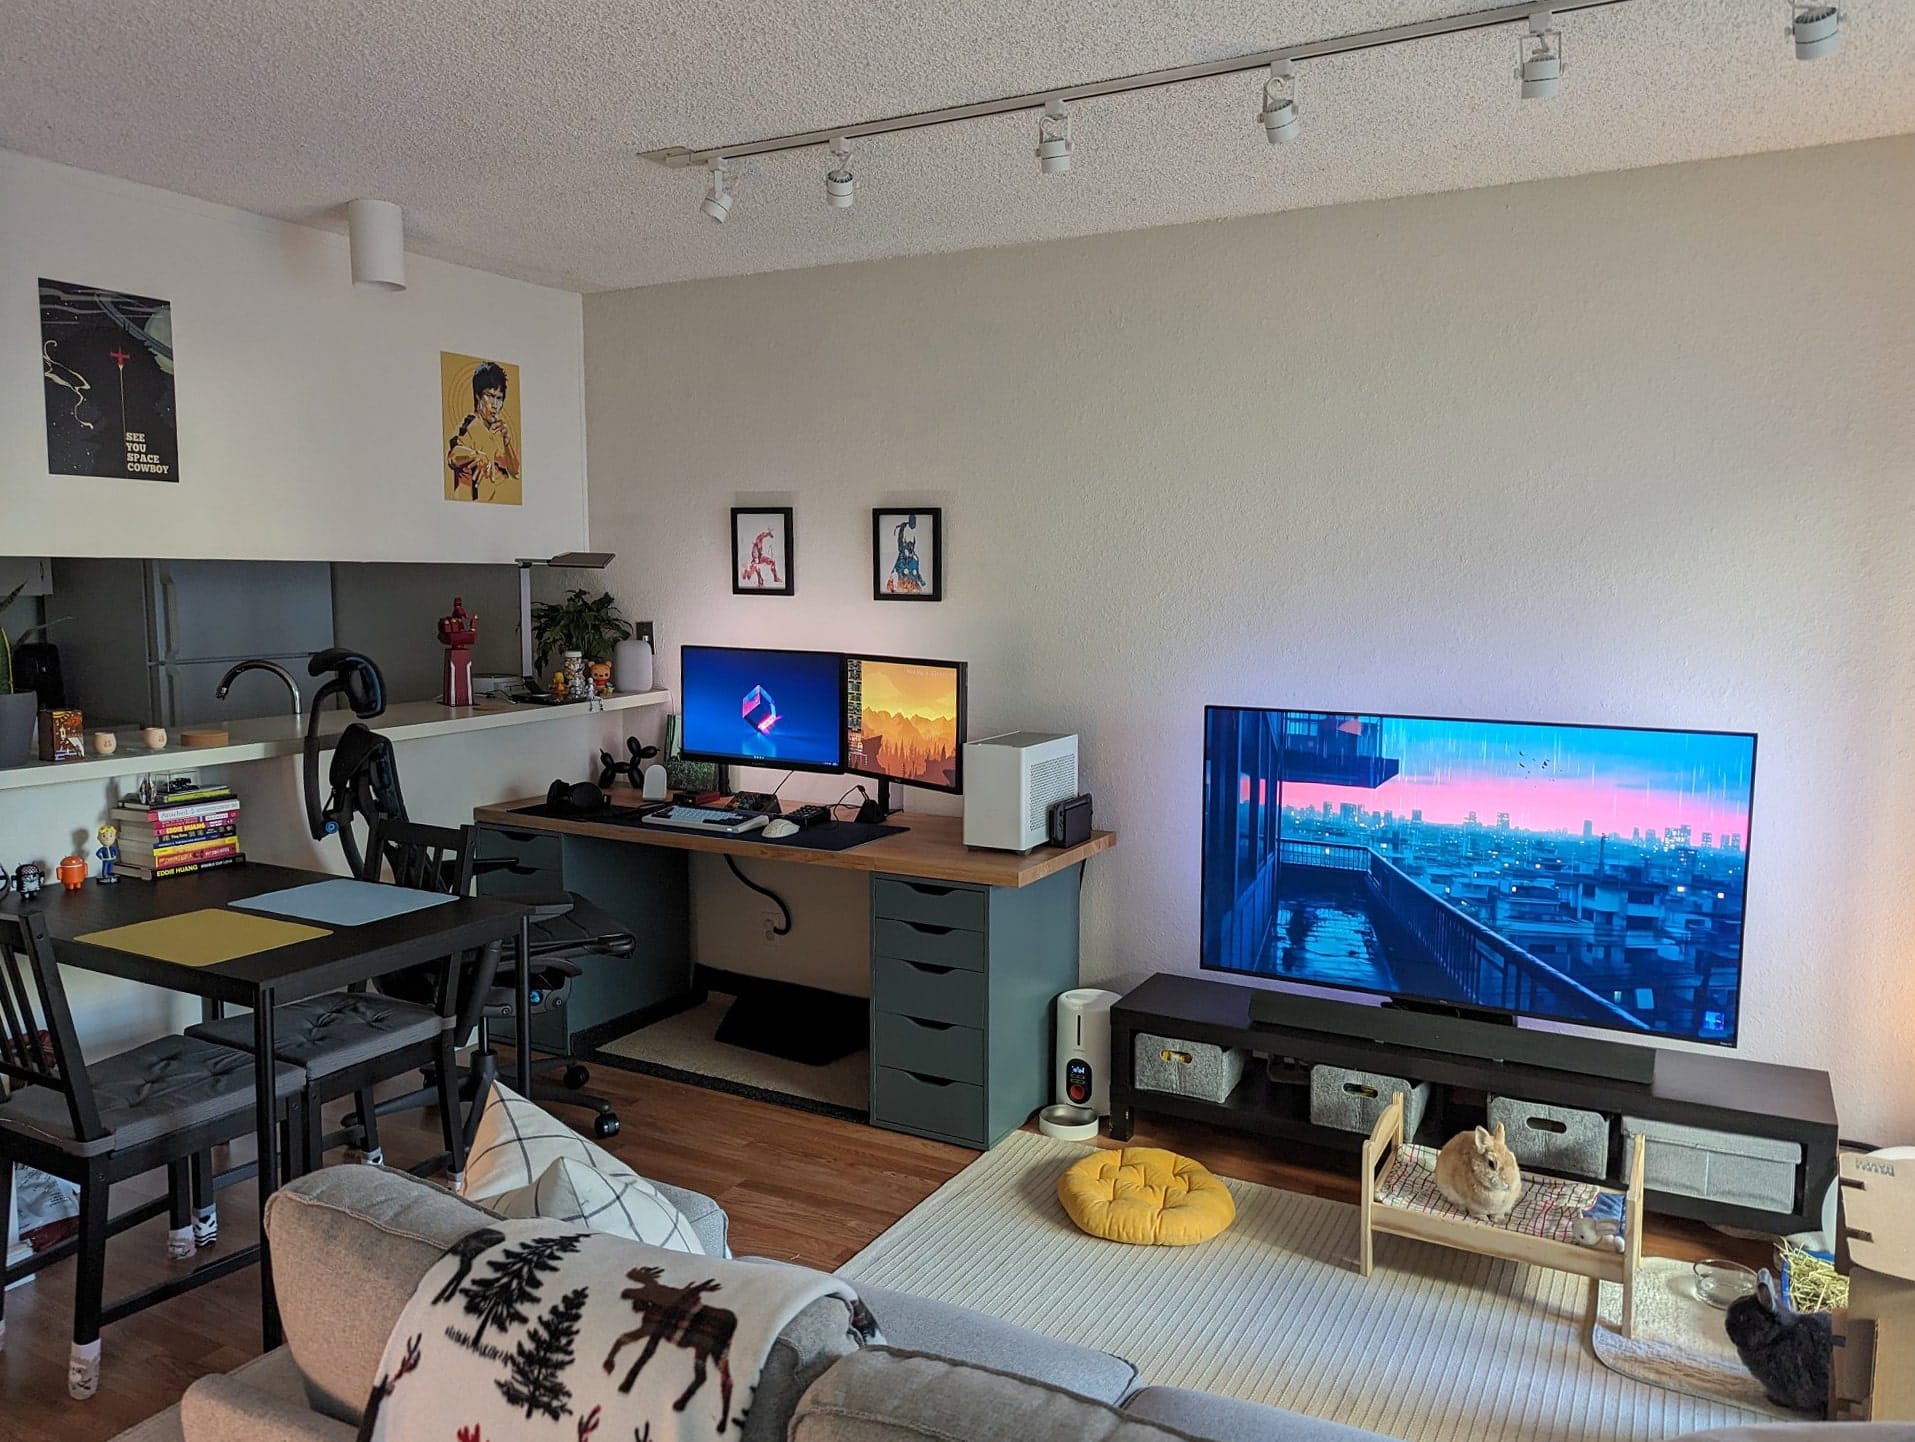 A cosy living space with a large TV opposite the sofa, a dining area to the left, and a home office setup with dual monitors, and artworks on the wall